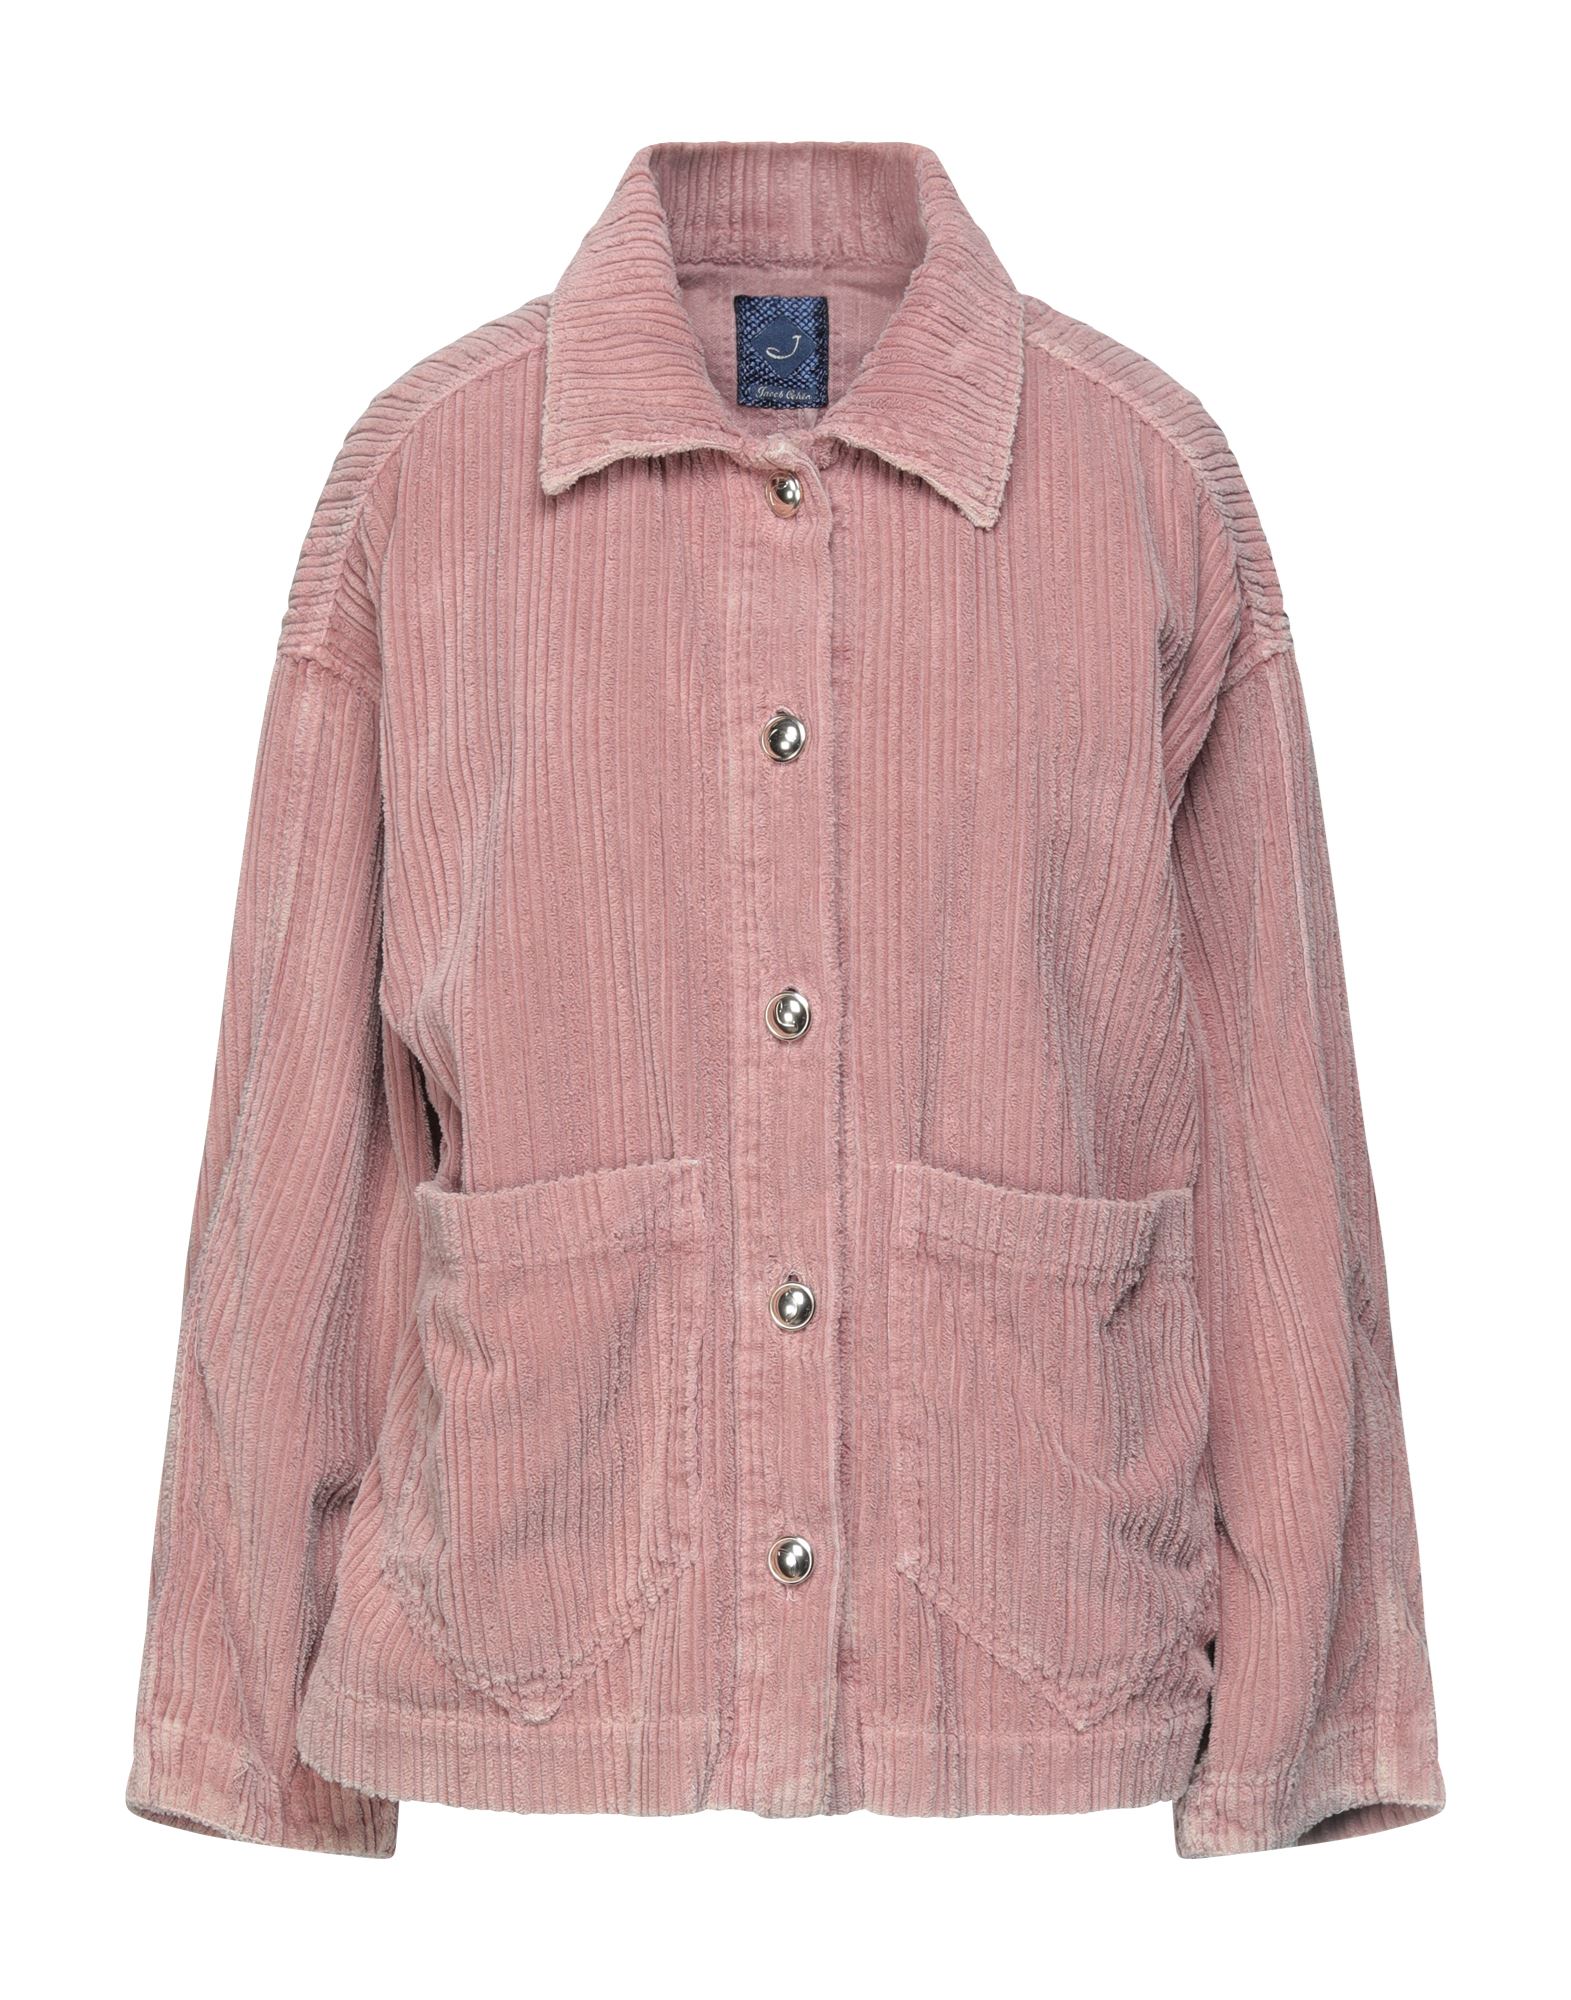 Jacob Cohёn Jackets In Pastel Pink